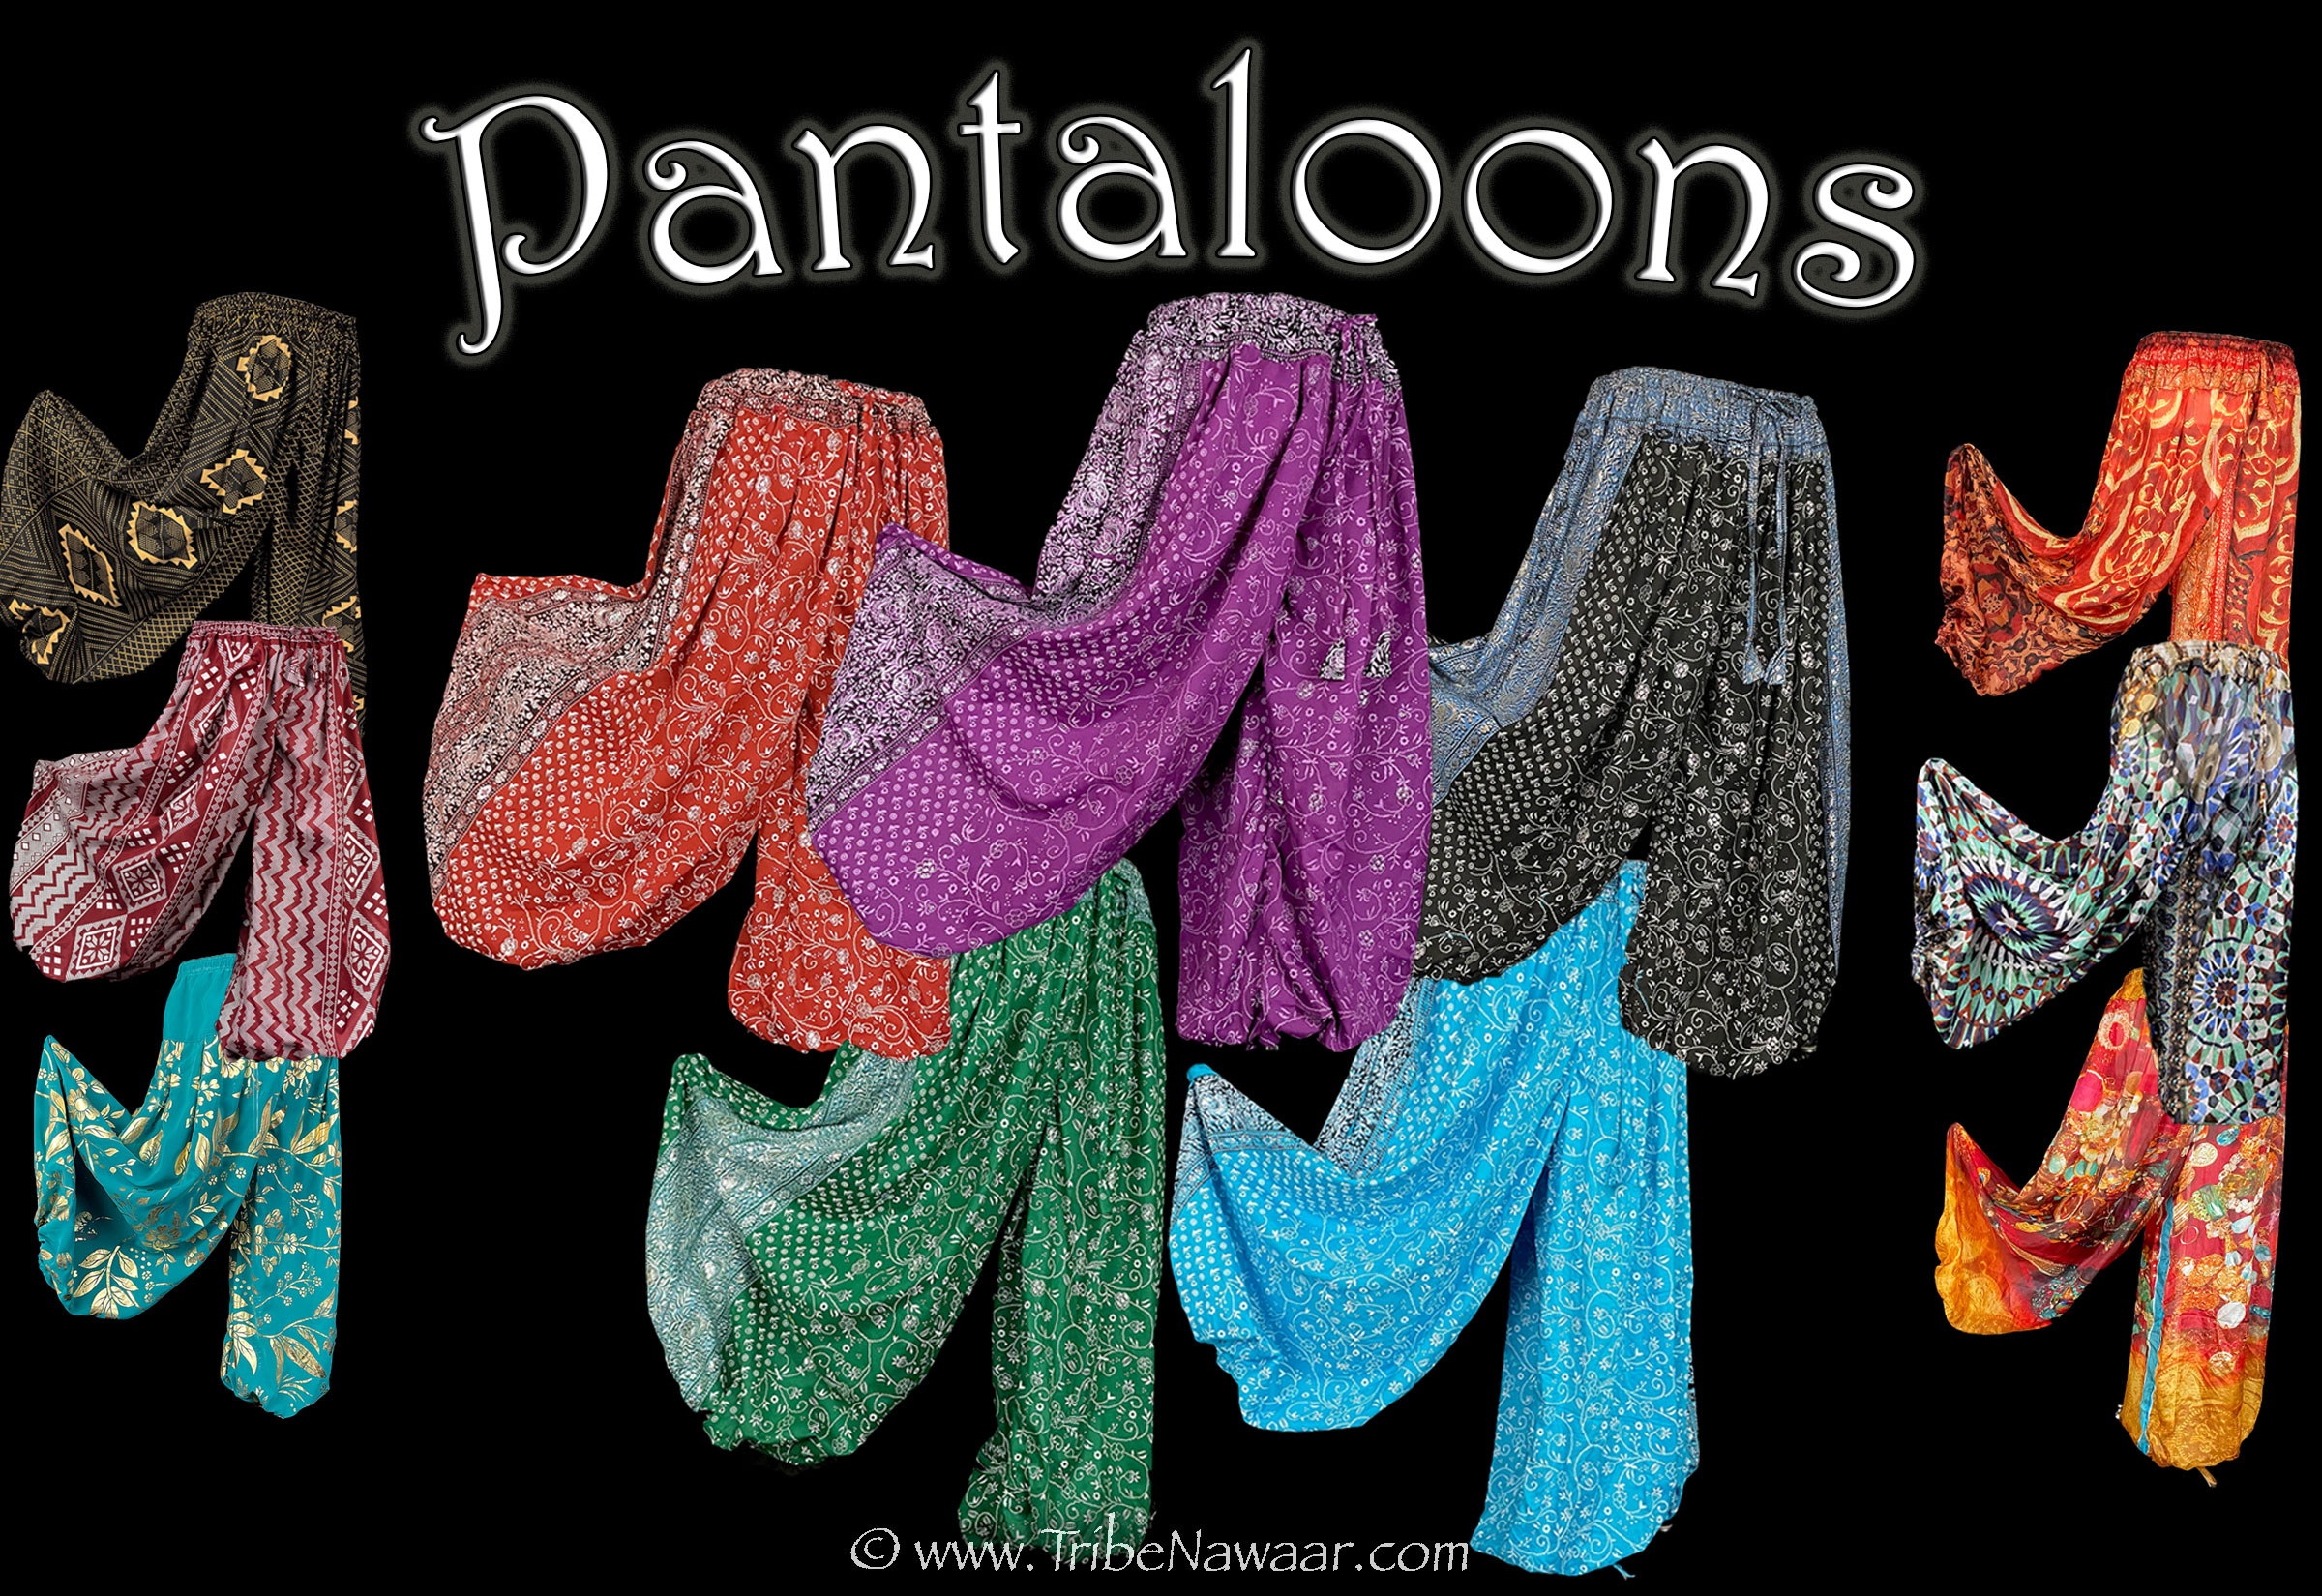 Pantaloons (also known as harem pants or salawar) are ideal for belly dance. Available from The Nawaar Marketplace at www.TribeNawaar.com